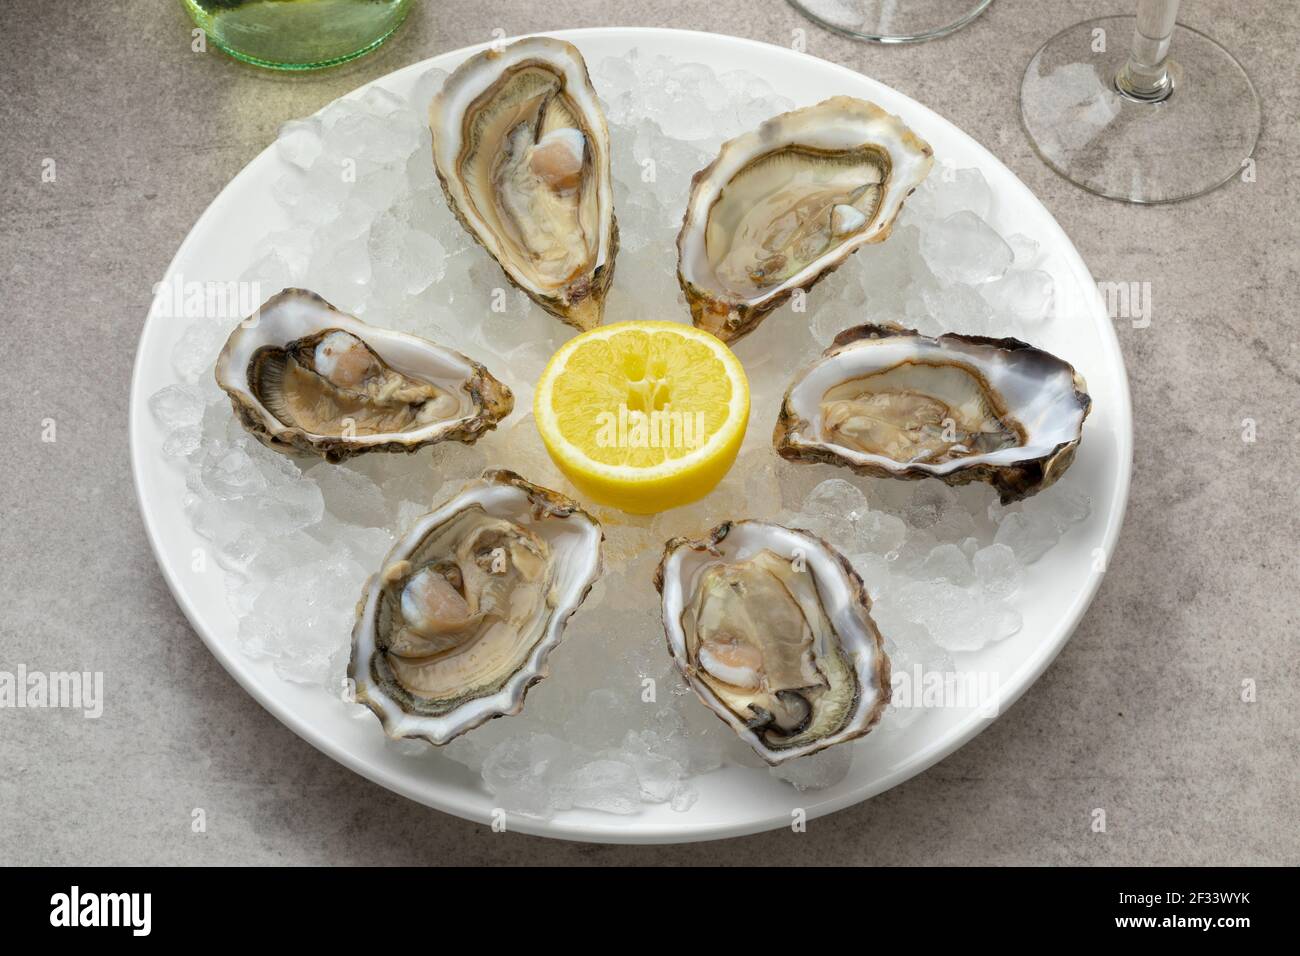 Plate with fresh raw open Pacific oysters, Japanese oyster on ice as appetizer or snack Stock Photo